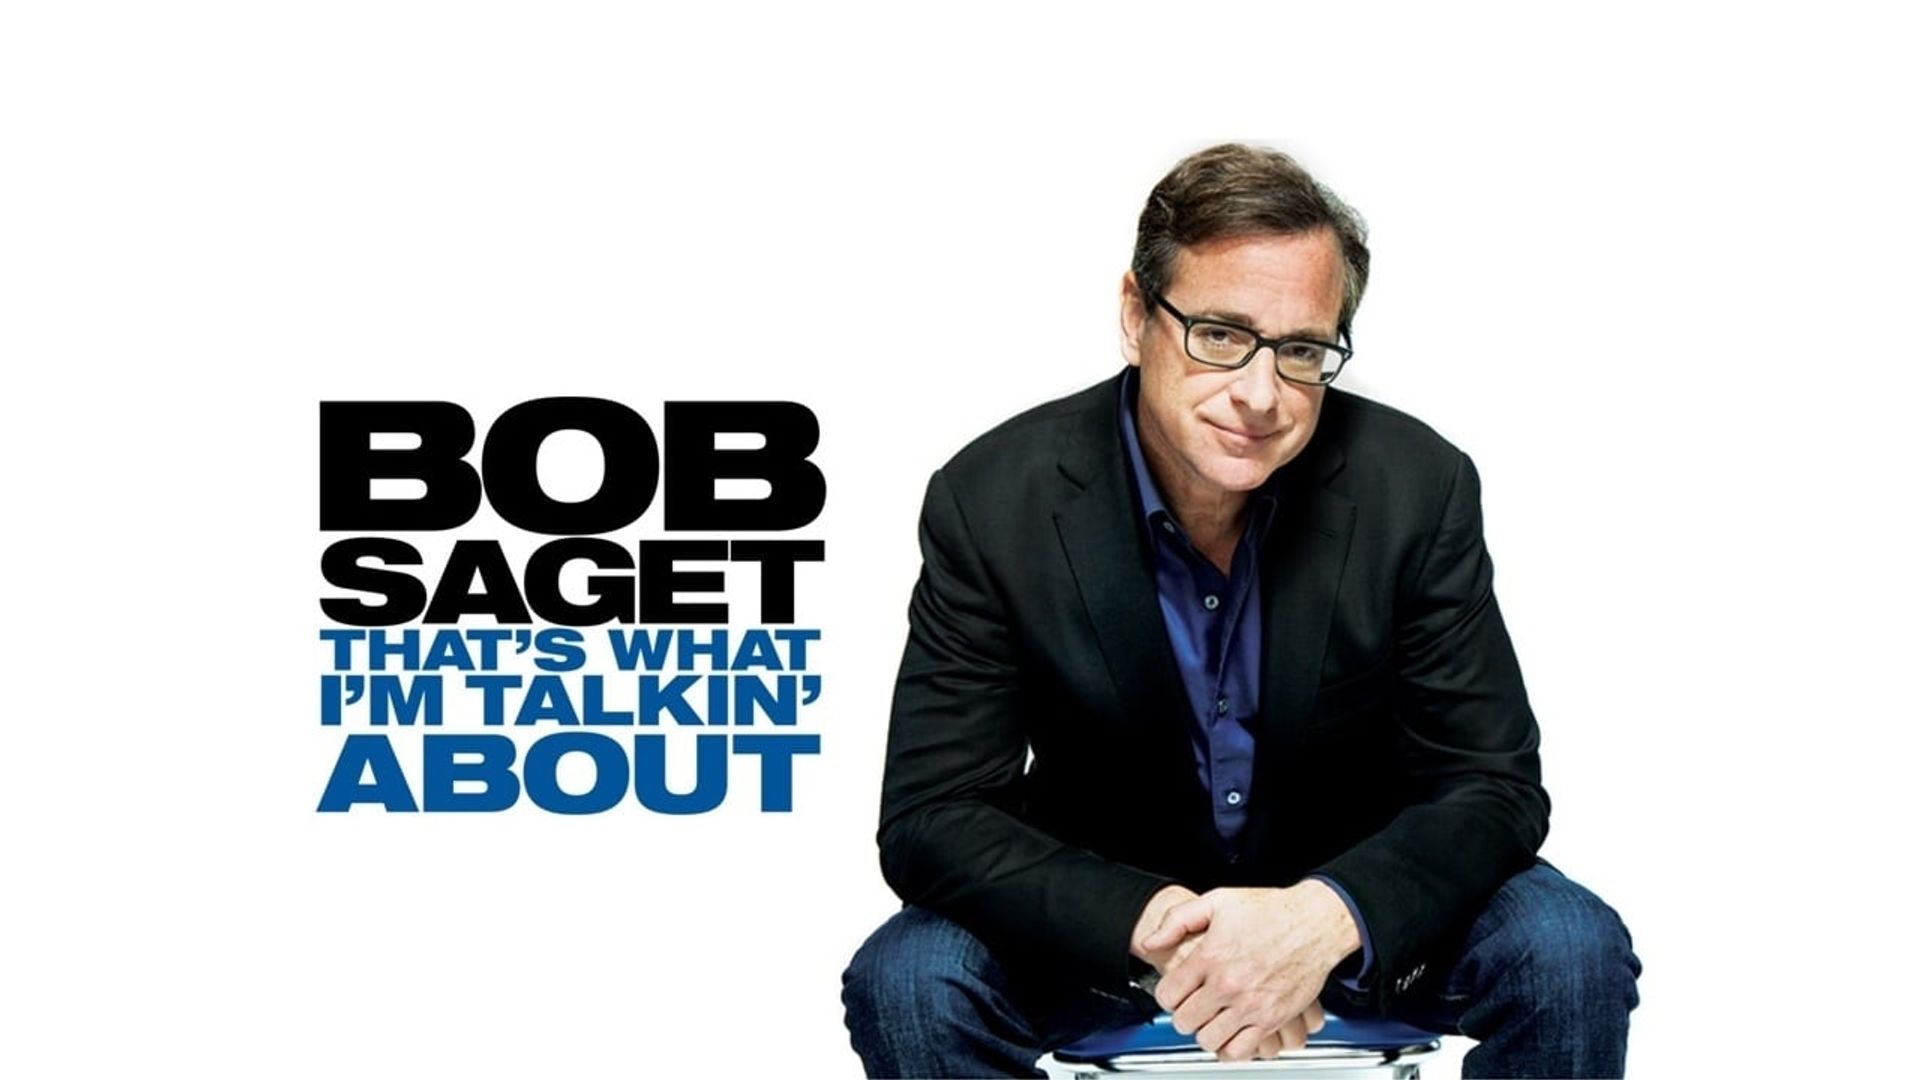 Bob Saget: That's What I'm Talkin' About background